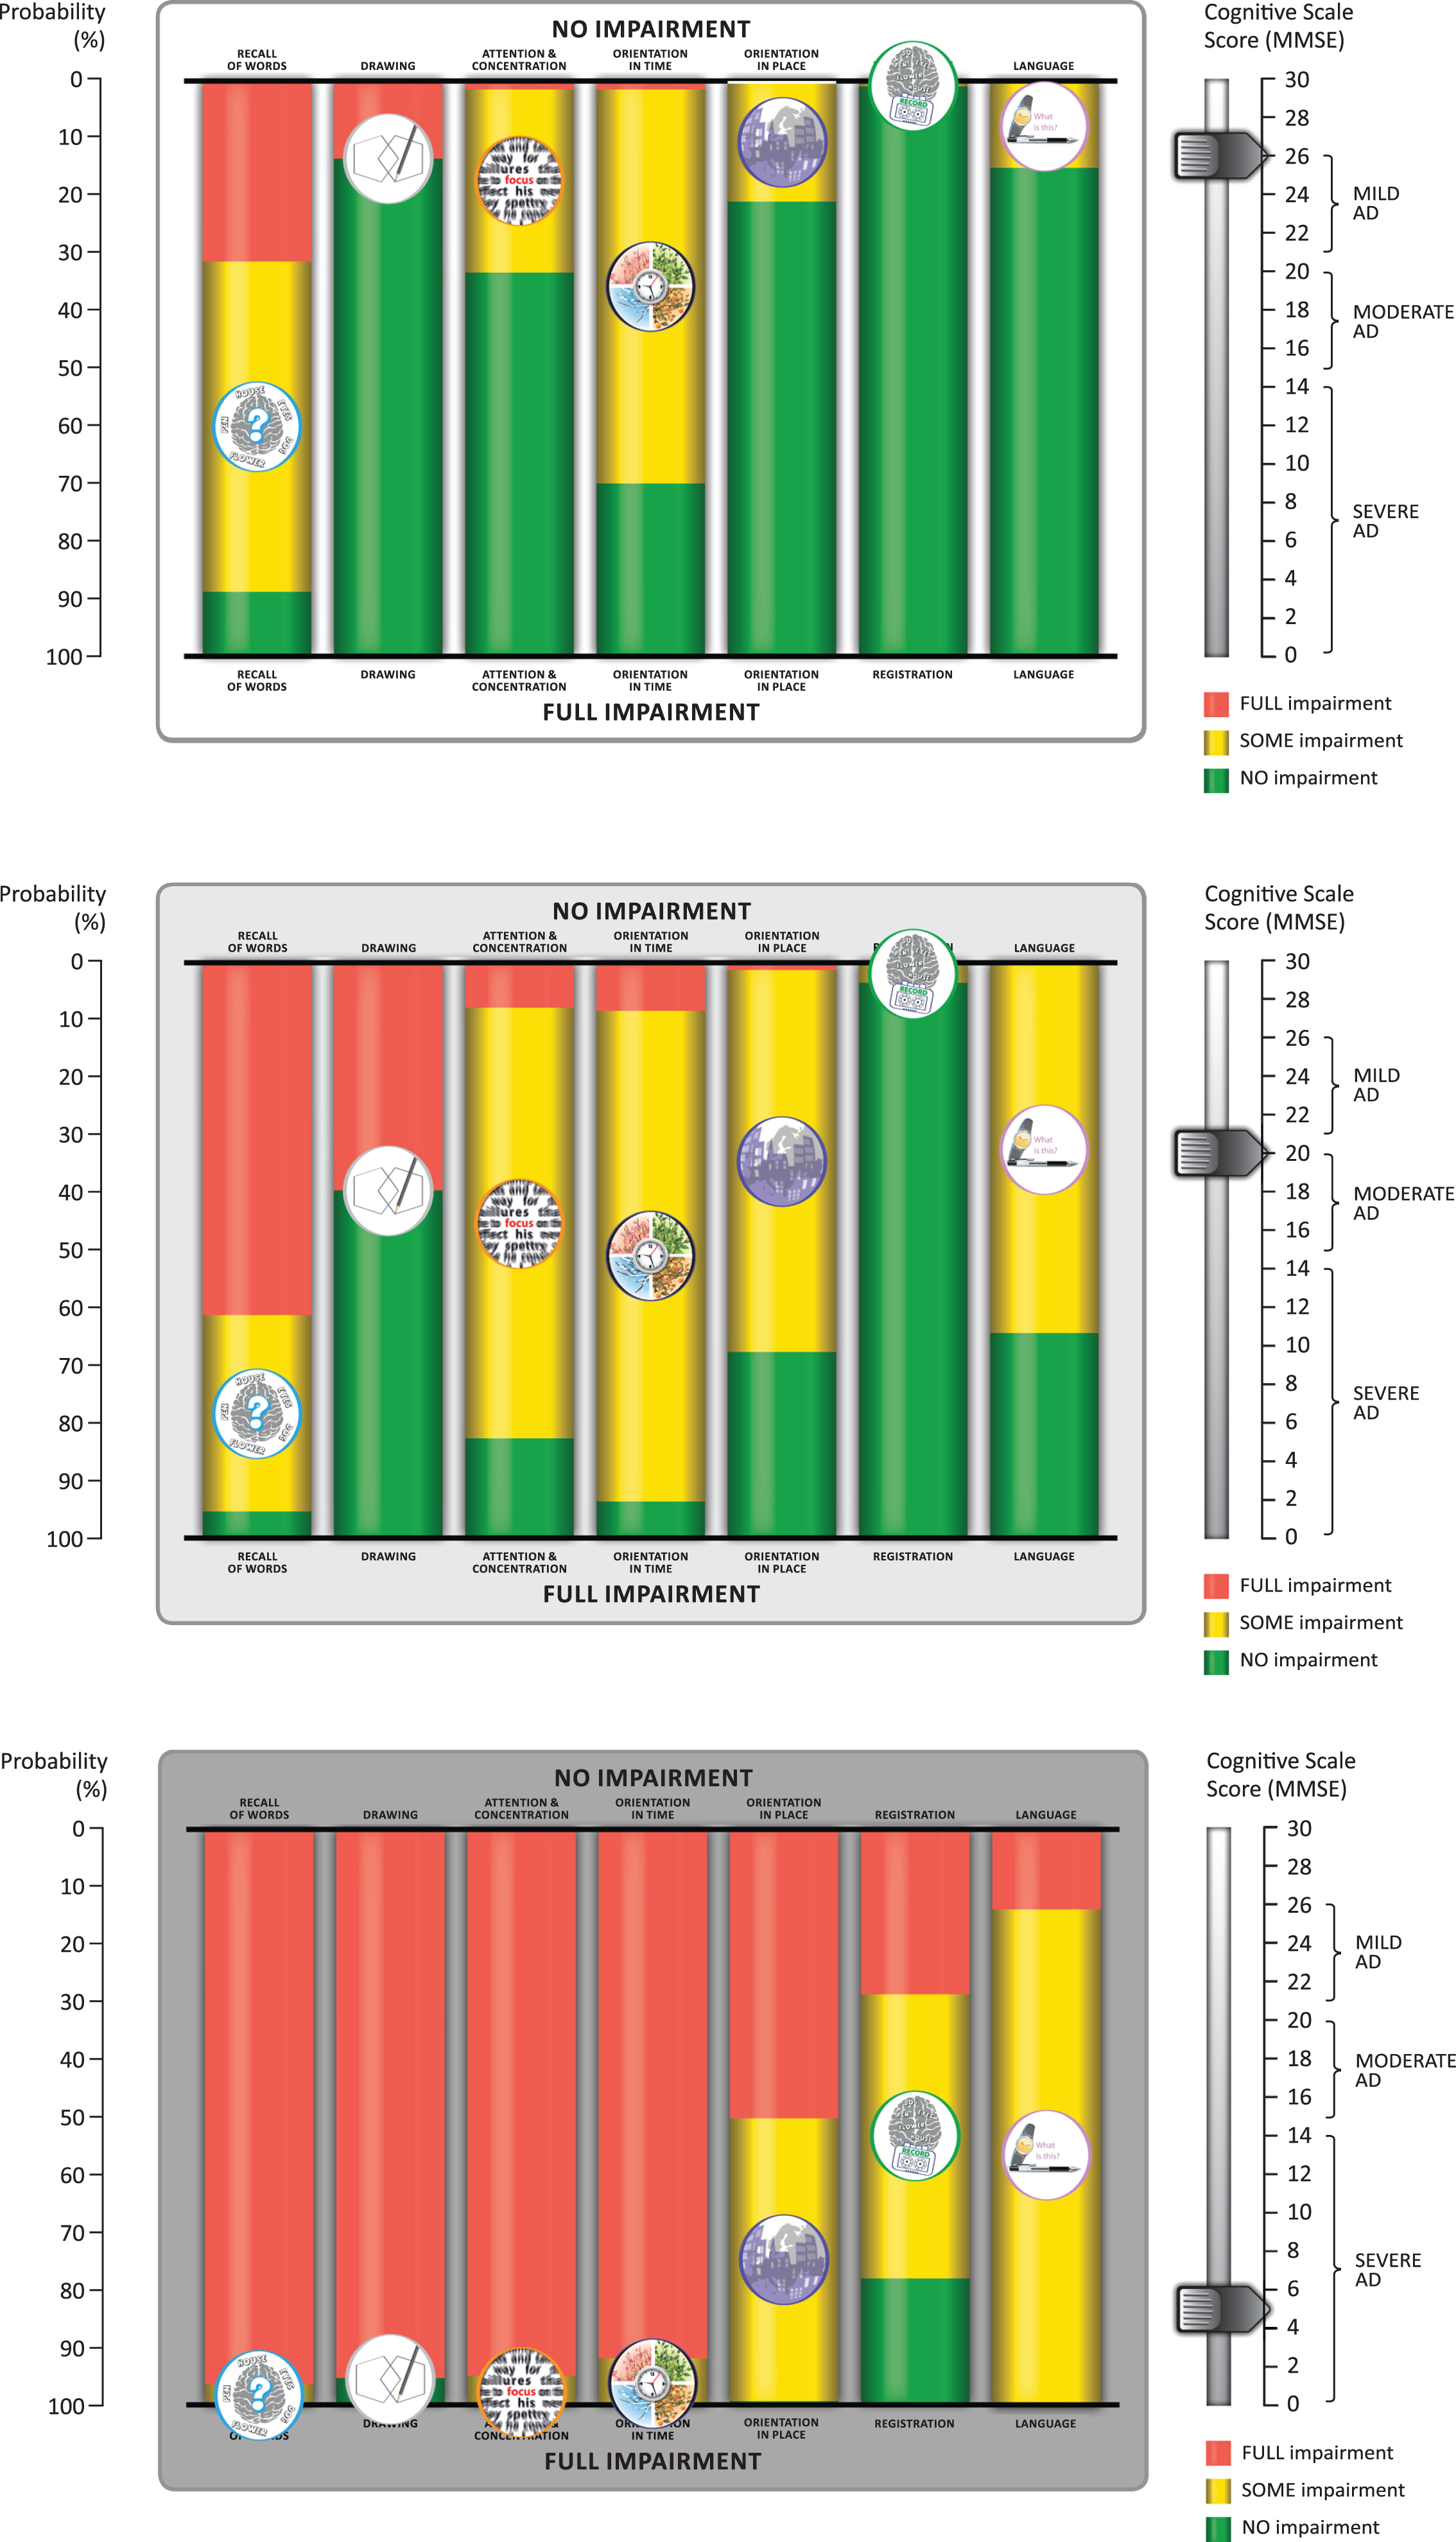 Sample stills from the animation developed from the bar chart visualization of the sequence of cognitive decline showing the probability of impairment at MMSE total scores of 26, 20, and 5. The symptom icons are seen to drop down from top to bottom asthe disease progresses. They are placed in the middle of the yellow bar, where they represent the likelihood of having some impairment. The full animation counts down each level of MMSE total score from 26 to 0, as shown in the Supplementary Video.